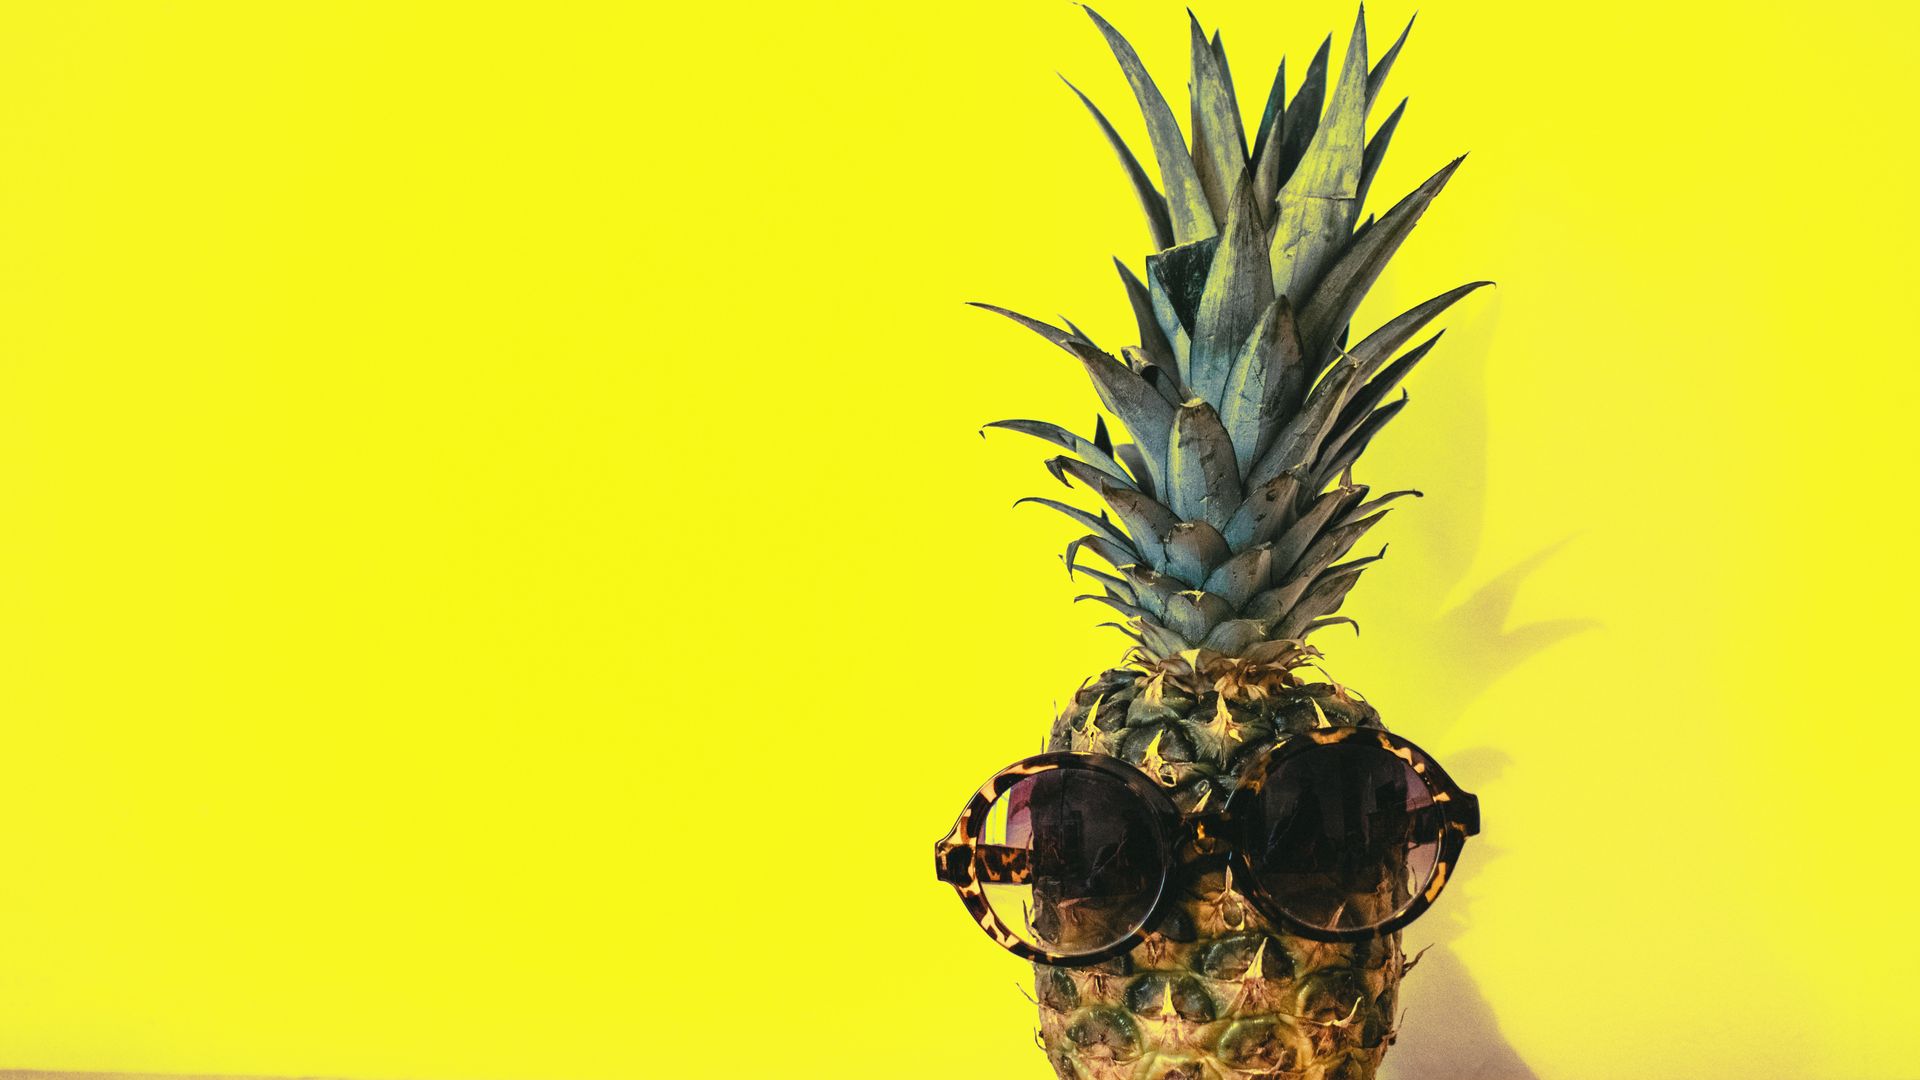 Pineapple With Sunglasses Beside Yellow Surface - National Relaxation Day 2019 , HD Wallpaper & Backgrounds